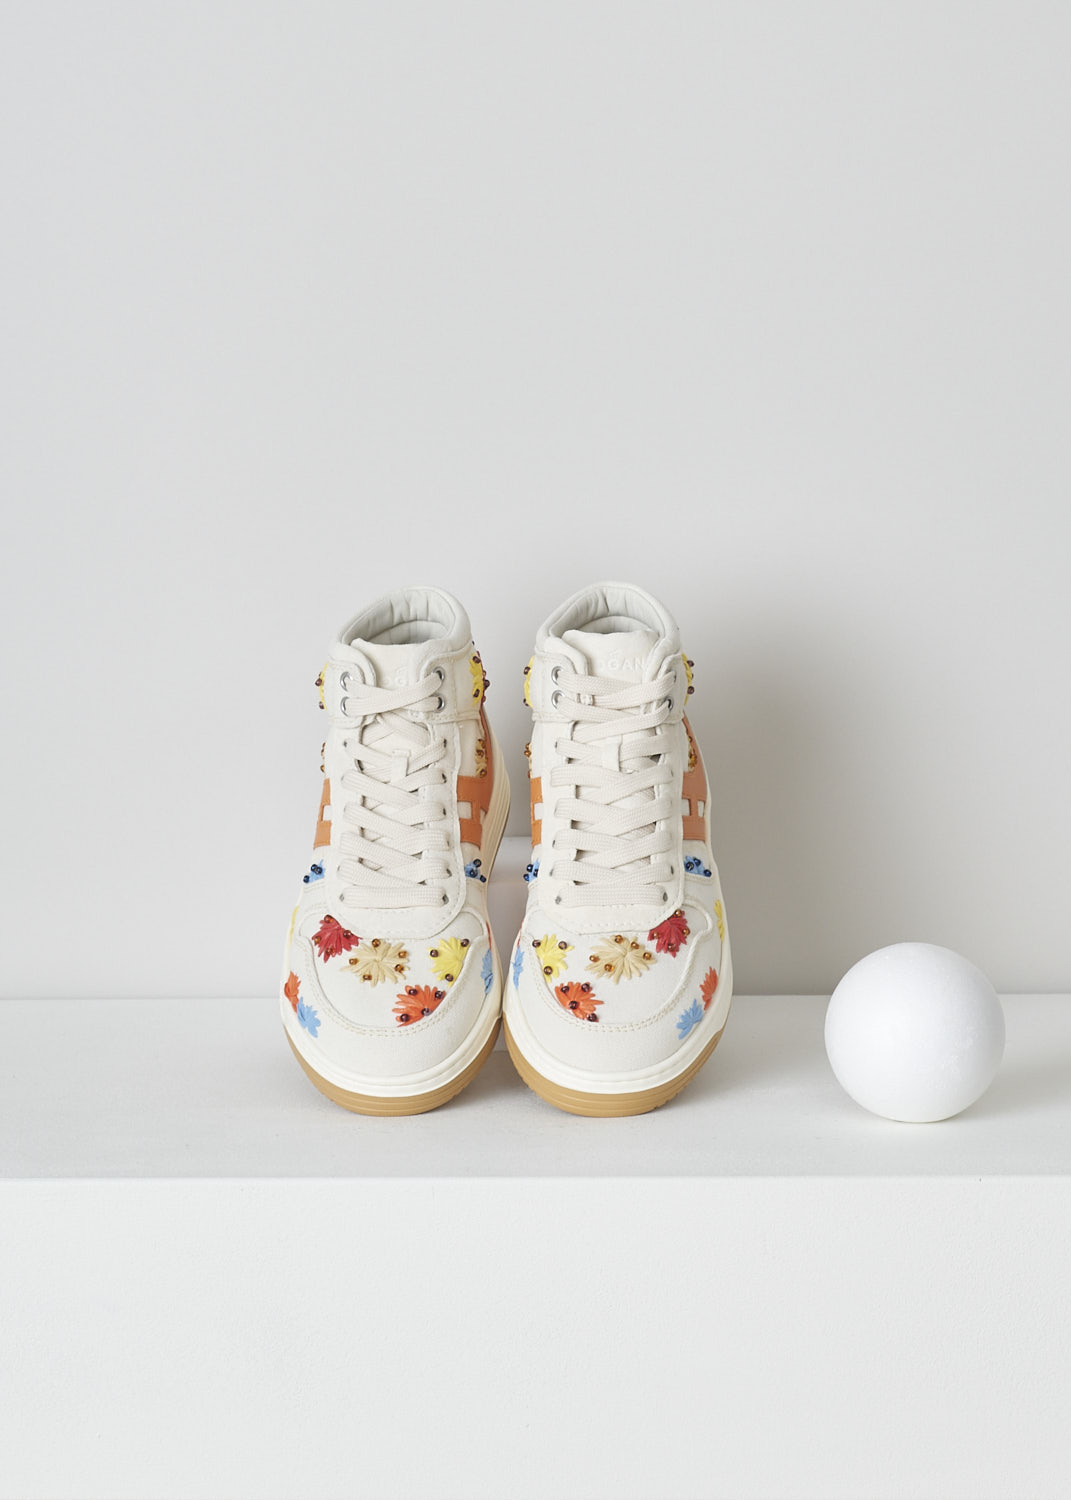 HOGAN, BEIGE HIGH TOP SNEAKERS WITH EMBROIDERY, GYW6300EZ10S530TA3_S53,  White, Orange, Red, Top, These high top sneakers have a front lace-up fastening. The sneakers have a beige canvas base with multicolored embroidered flowers. These flowers are further decorated with beads. On the sides, the brand's H-logo has been incorporated in the design in orange. These sneakers have  thick rubber soles. 

